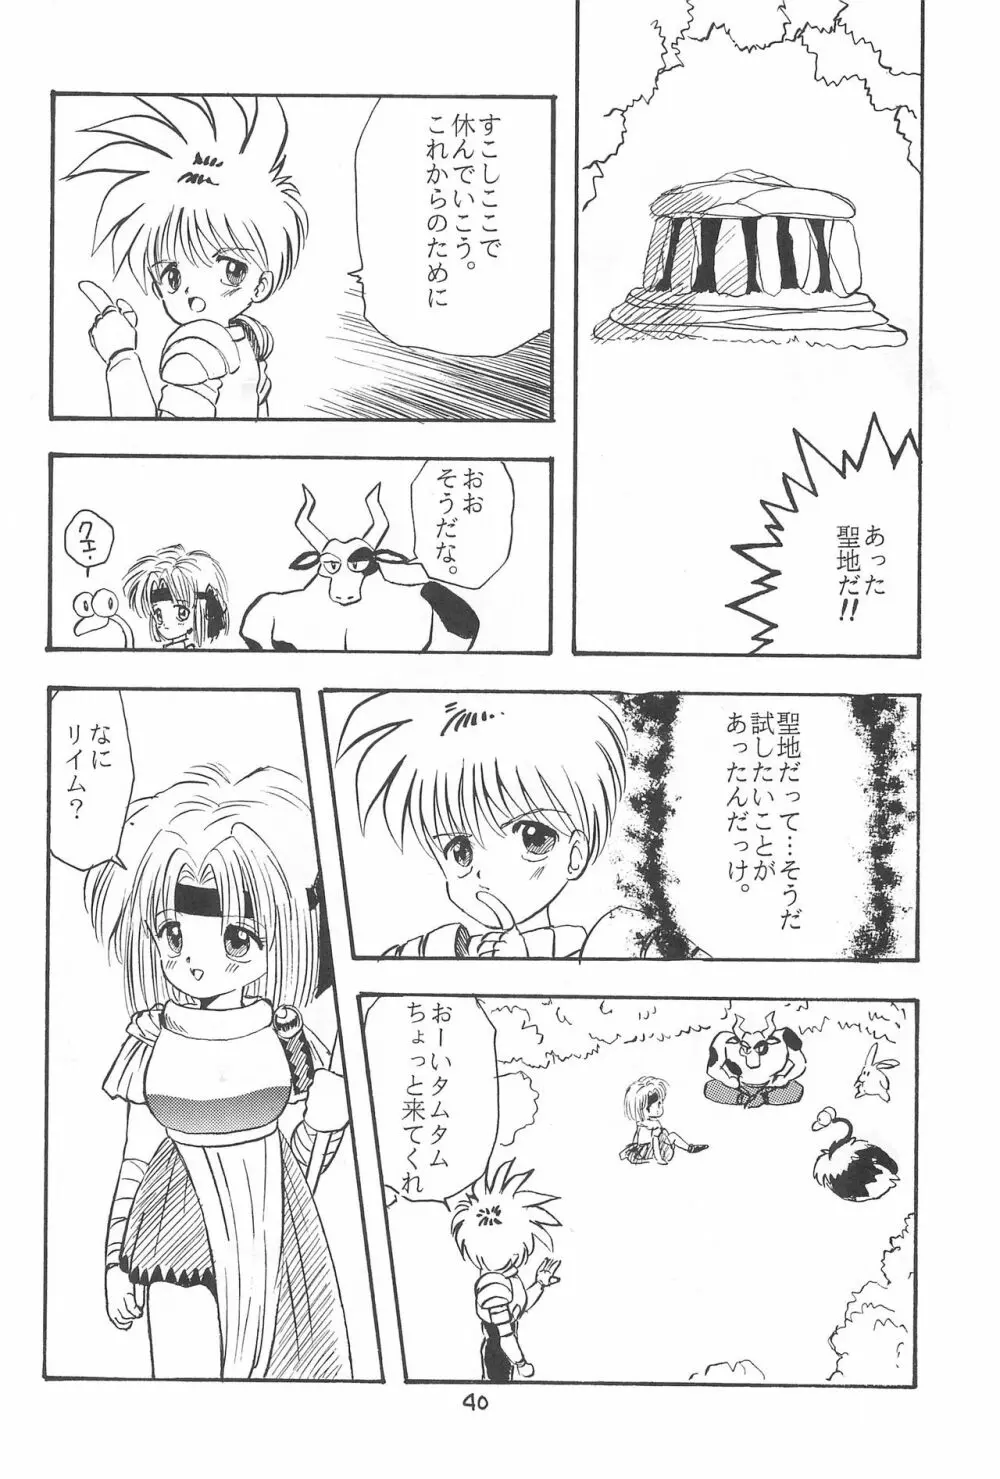 LITTLE GIRLS OF THE GAME CHARACTERS 2+ - page41